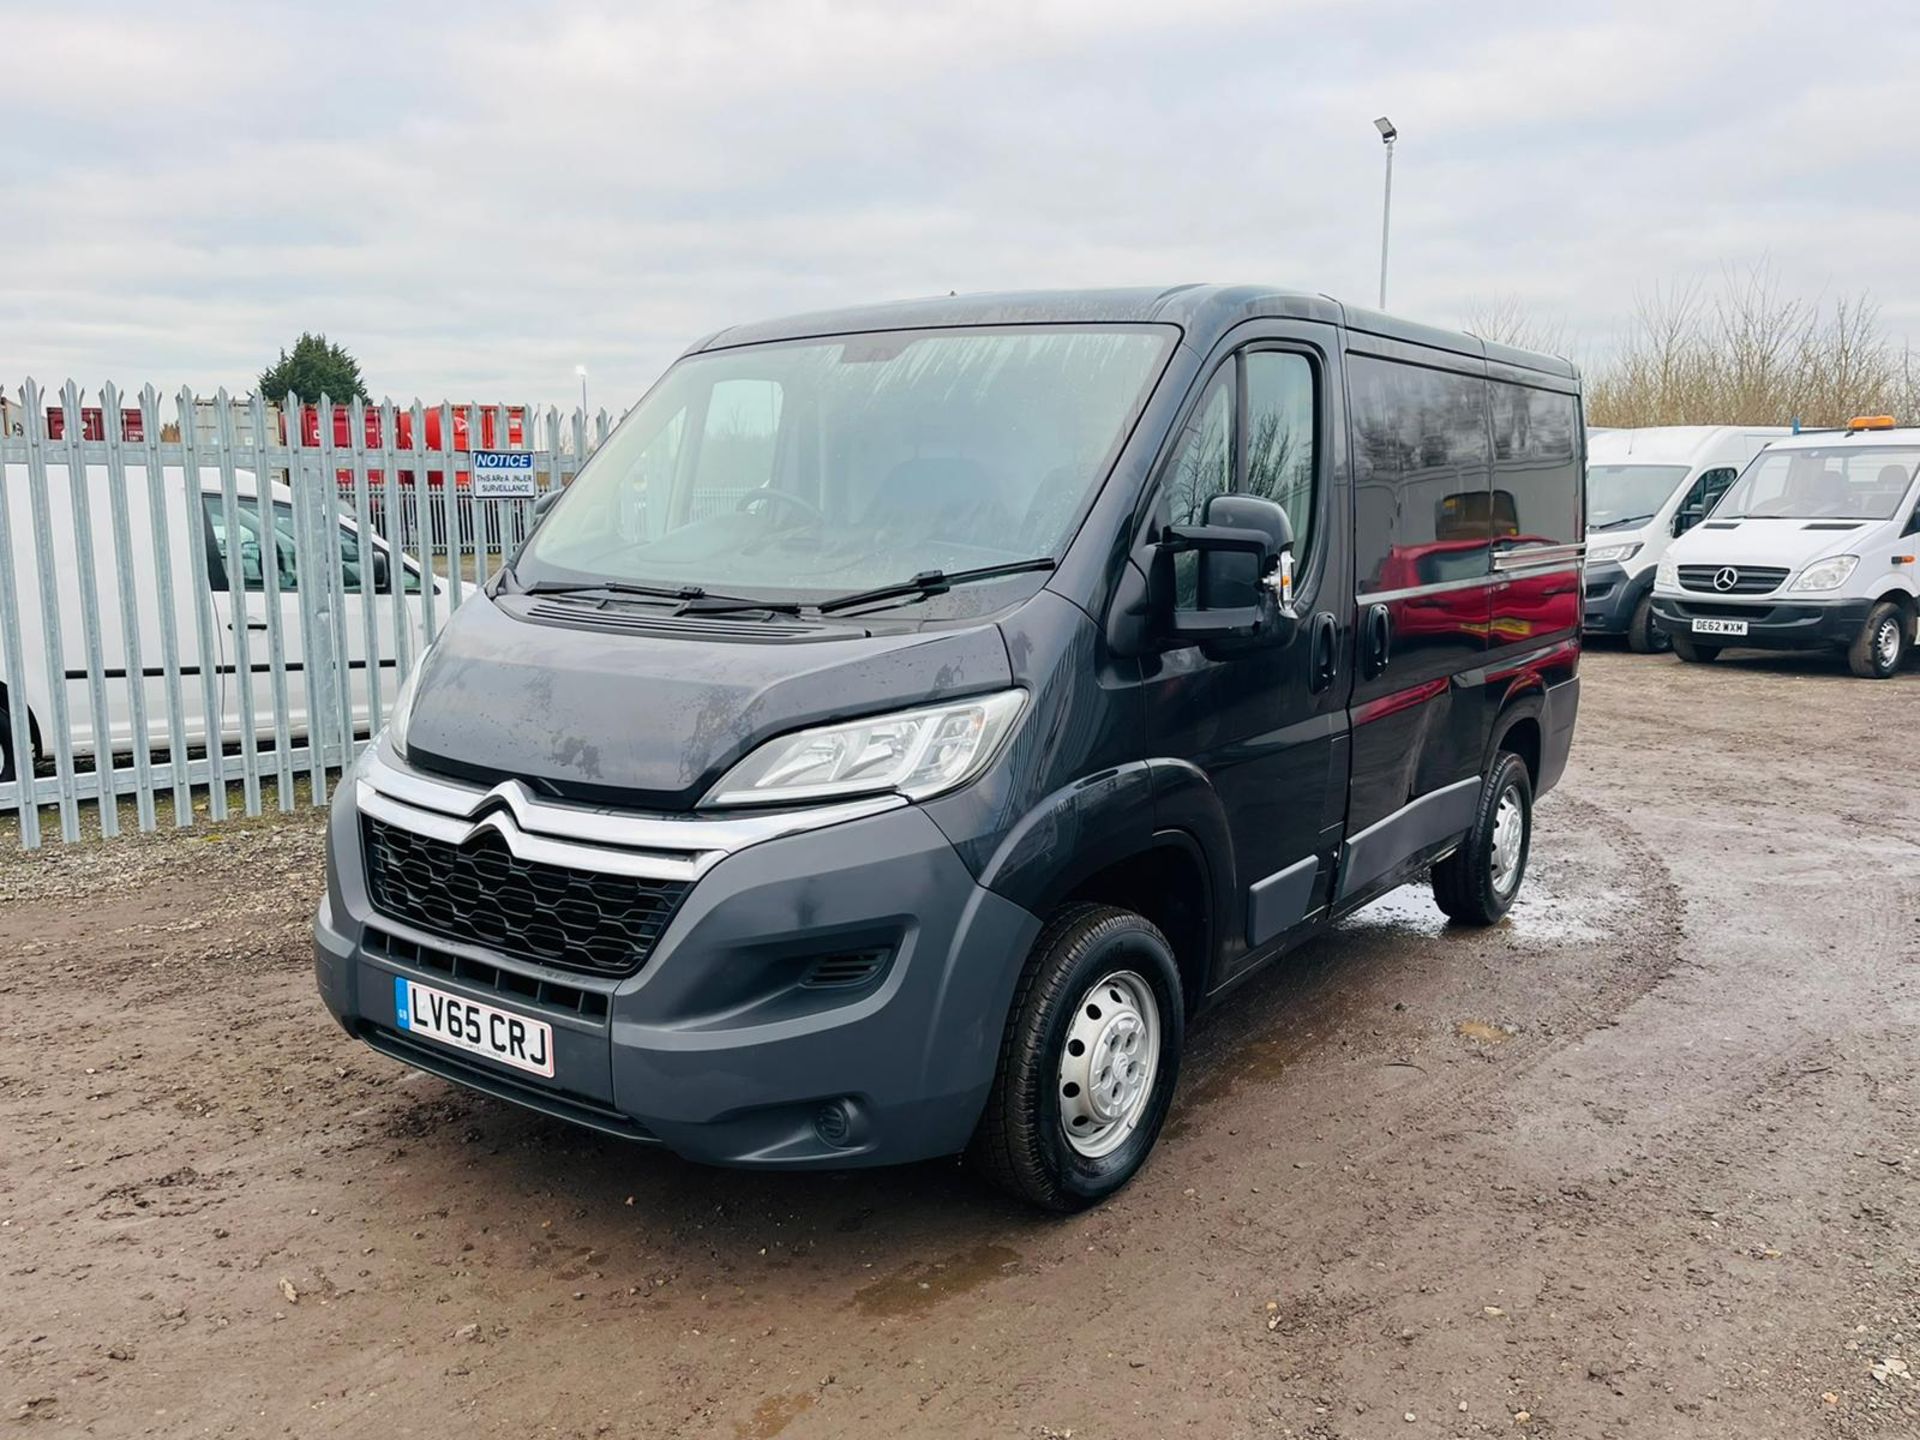 Citroen Relay 2.2 HDI Enterprise L1 H1 2015 '15 Reg' Air Con - ** Low Miles ** Only done 65K - Image 3 of 23